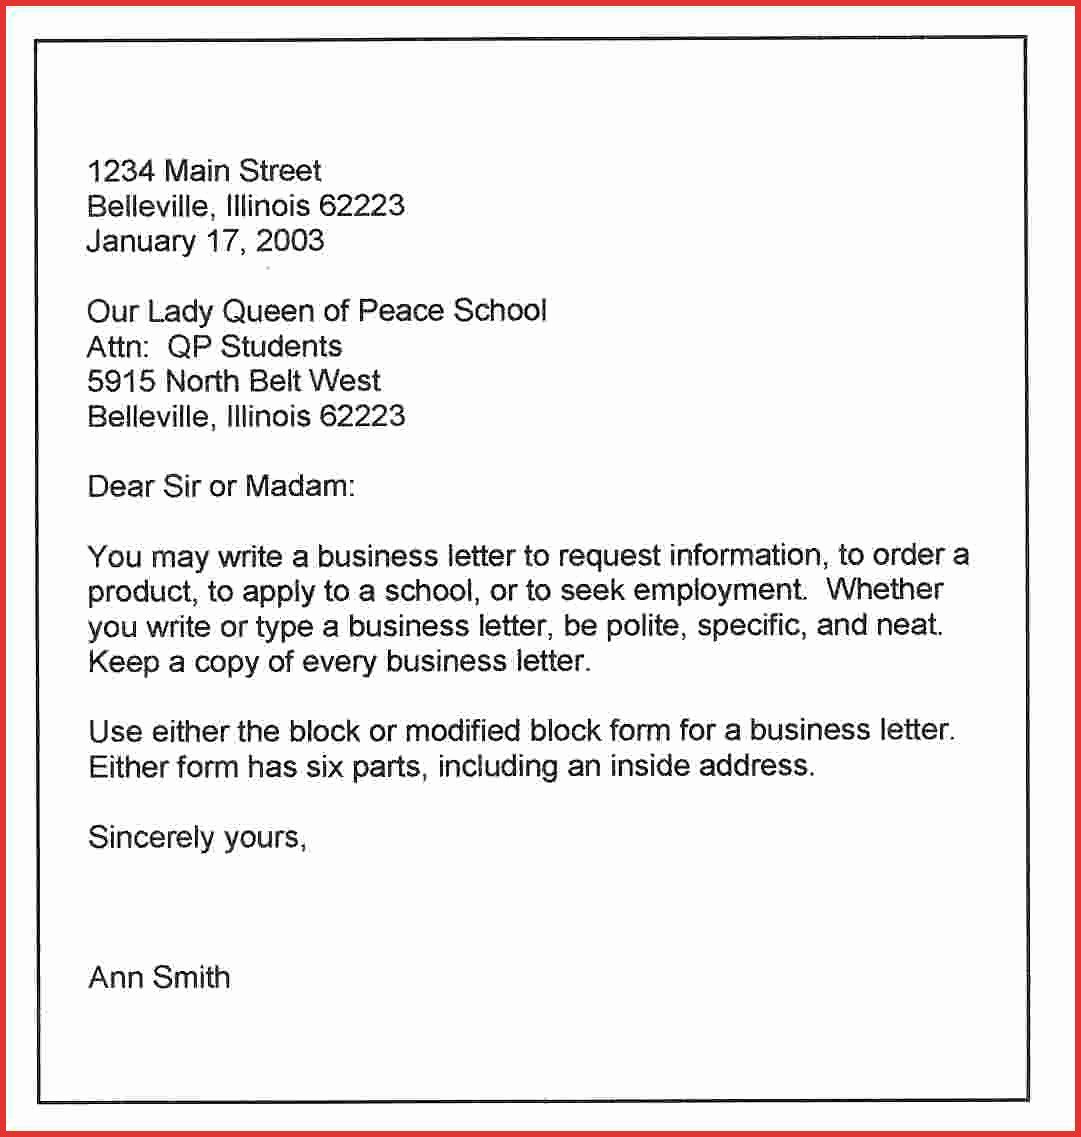 Financial Statement Letter Sample Best Of 9 10 Addressing A Letter with attn